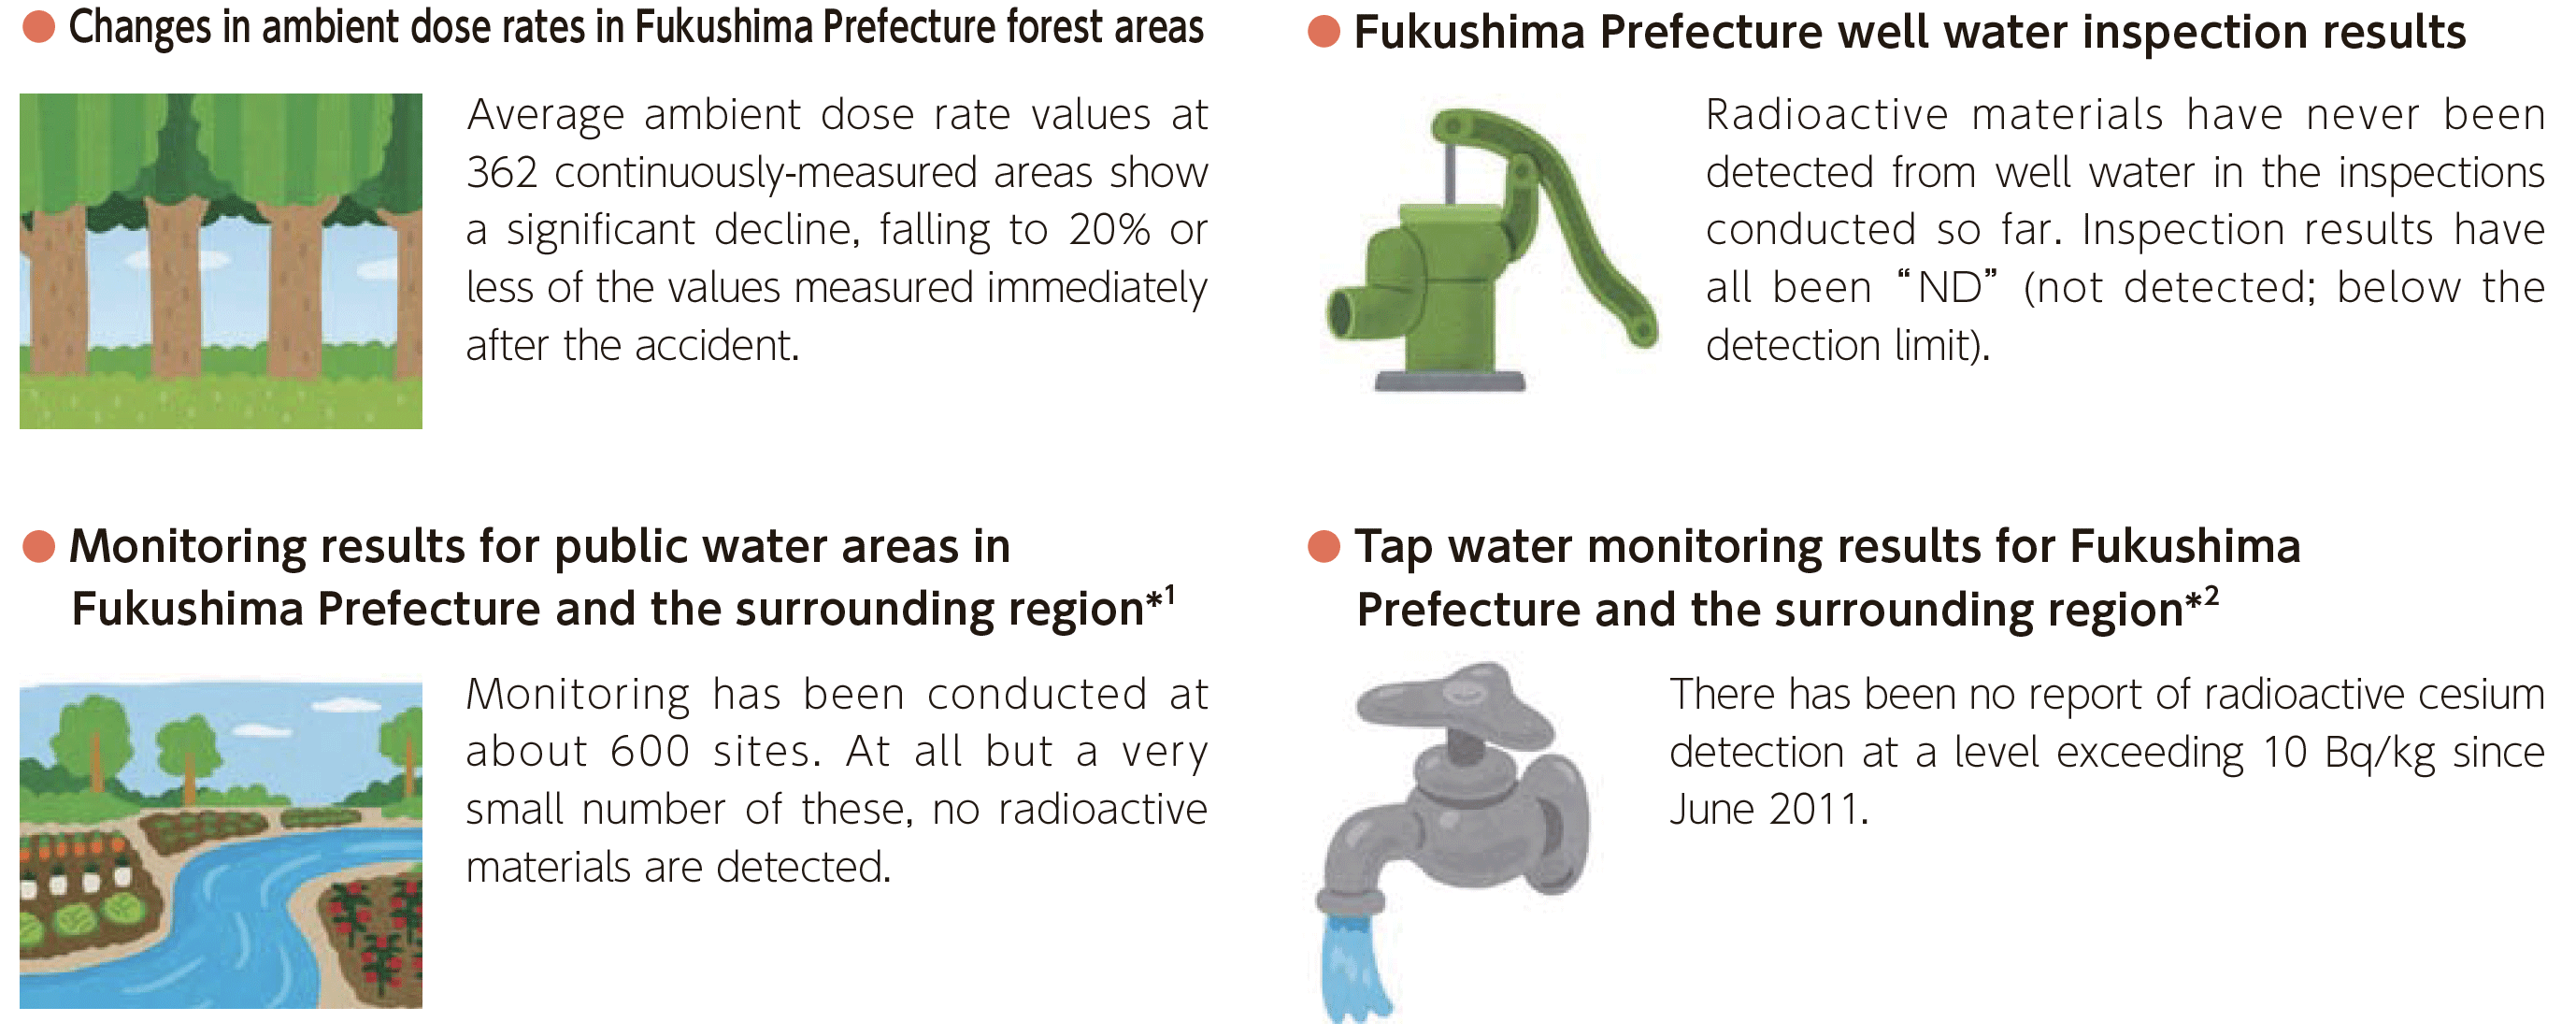 The major results from the monitoring implemented in accordance with the comprehensive radiation monitoring plan are shown below.